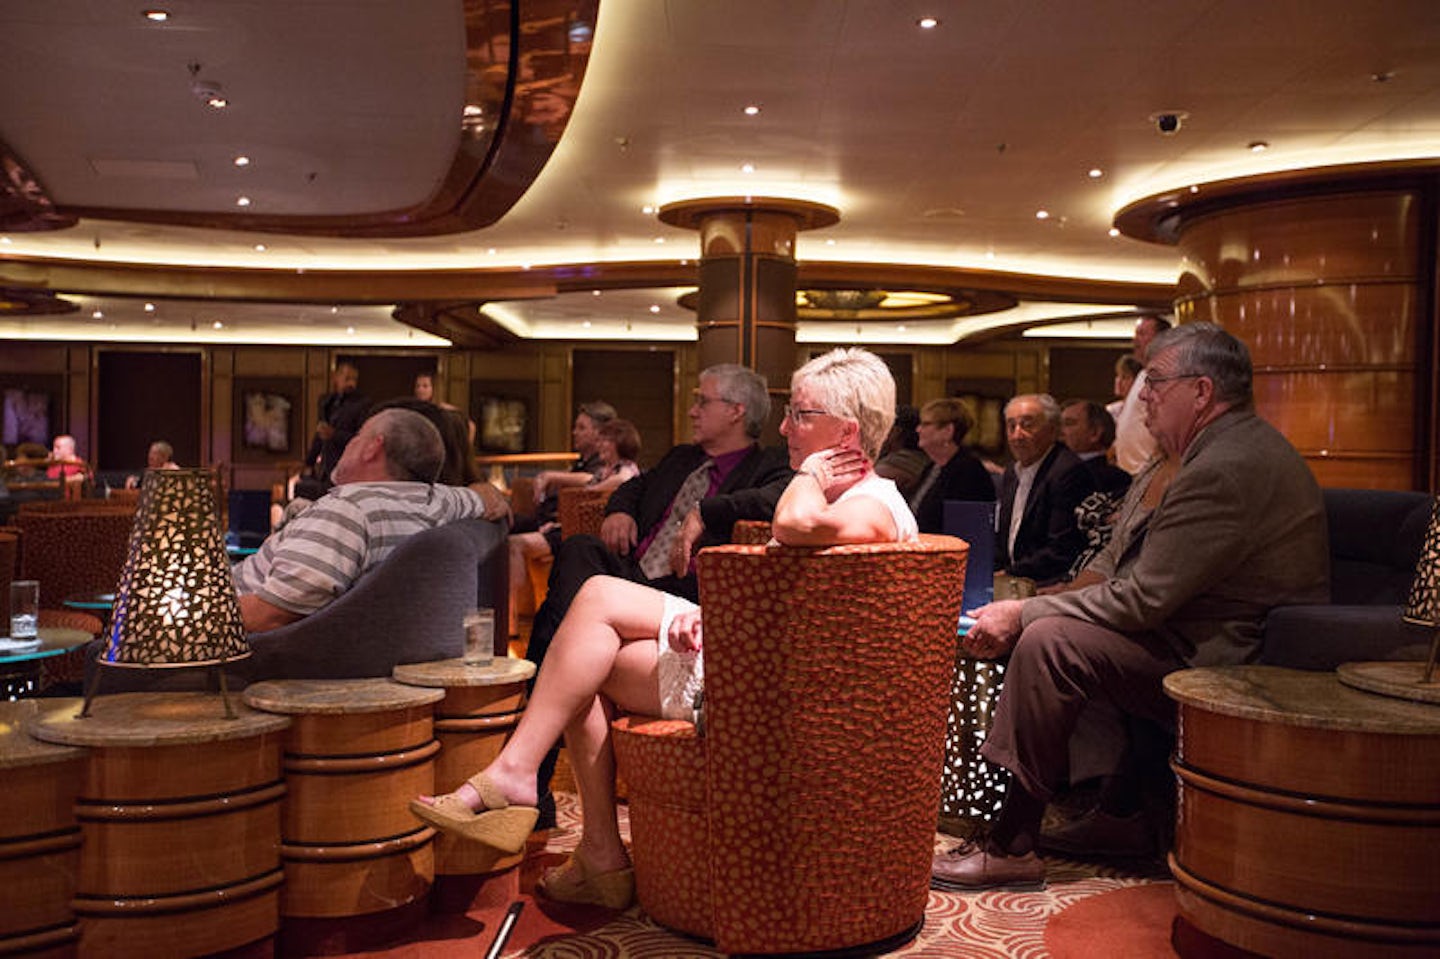 Comedy Magic Show in the Vista Lounge on Regal Princess